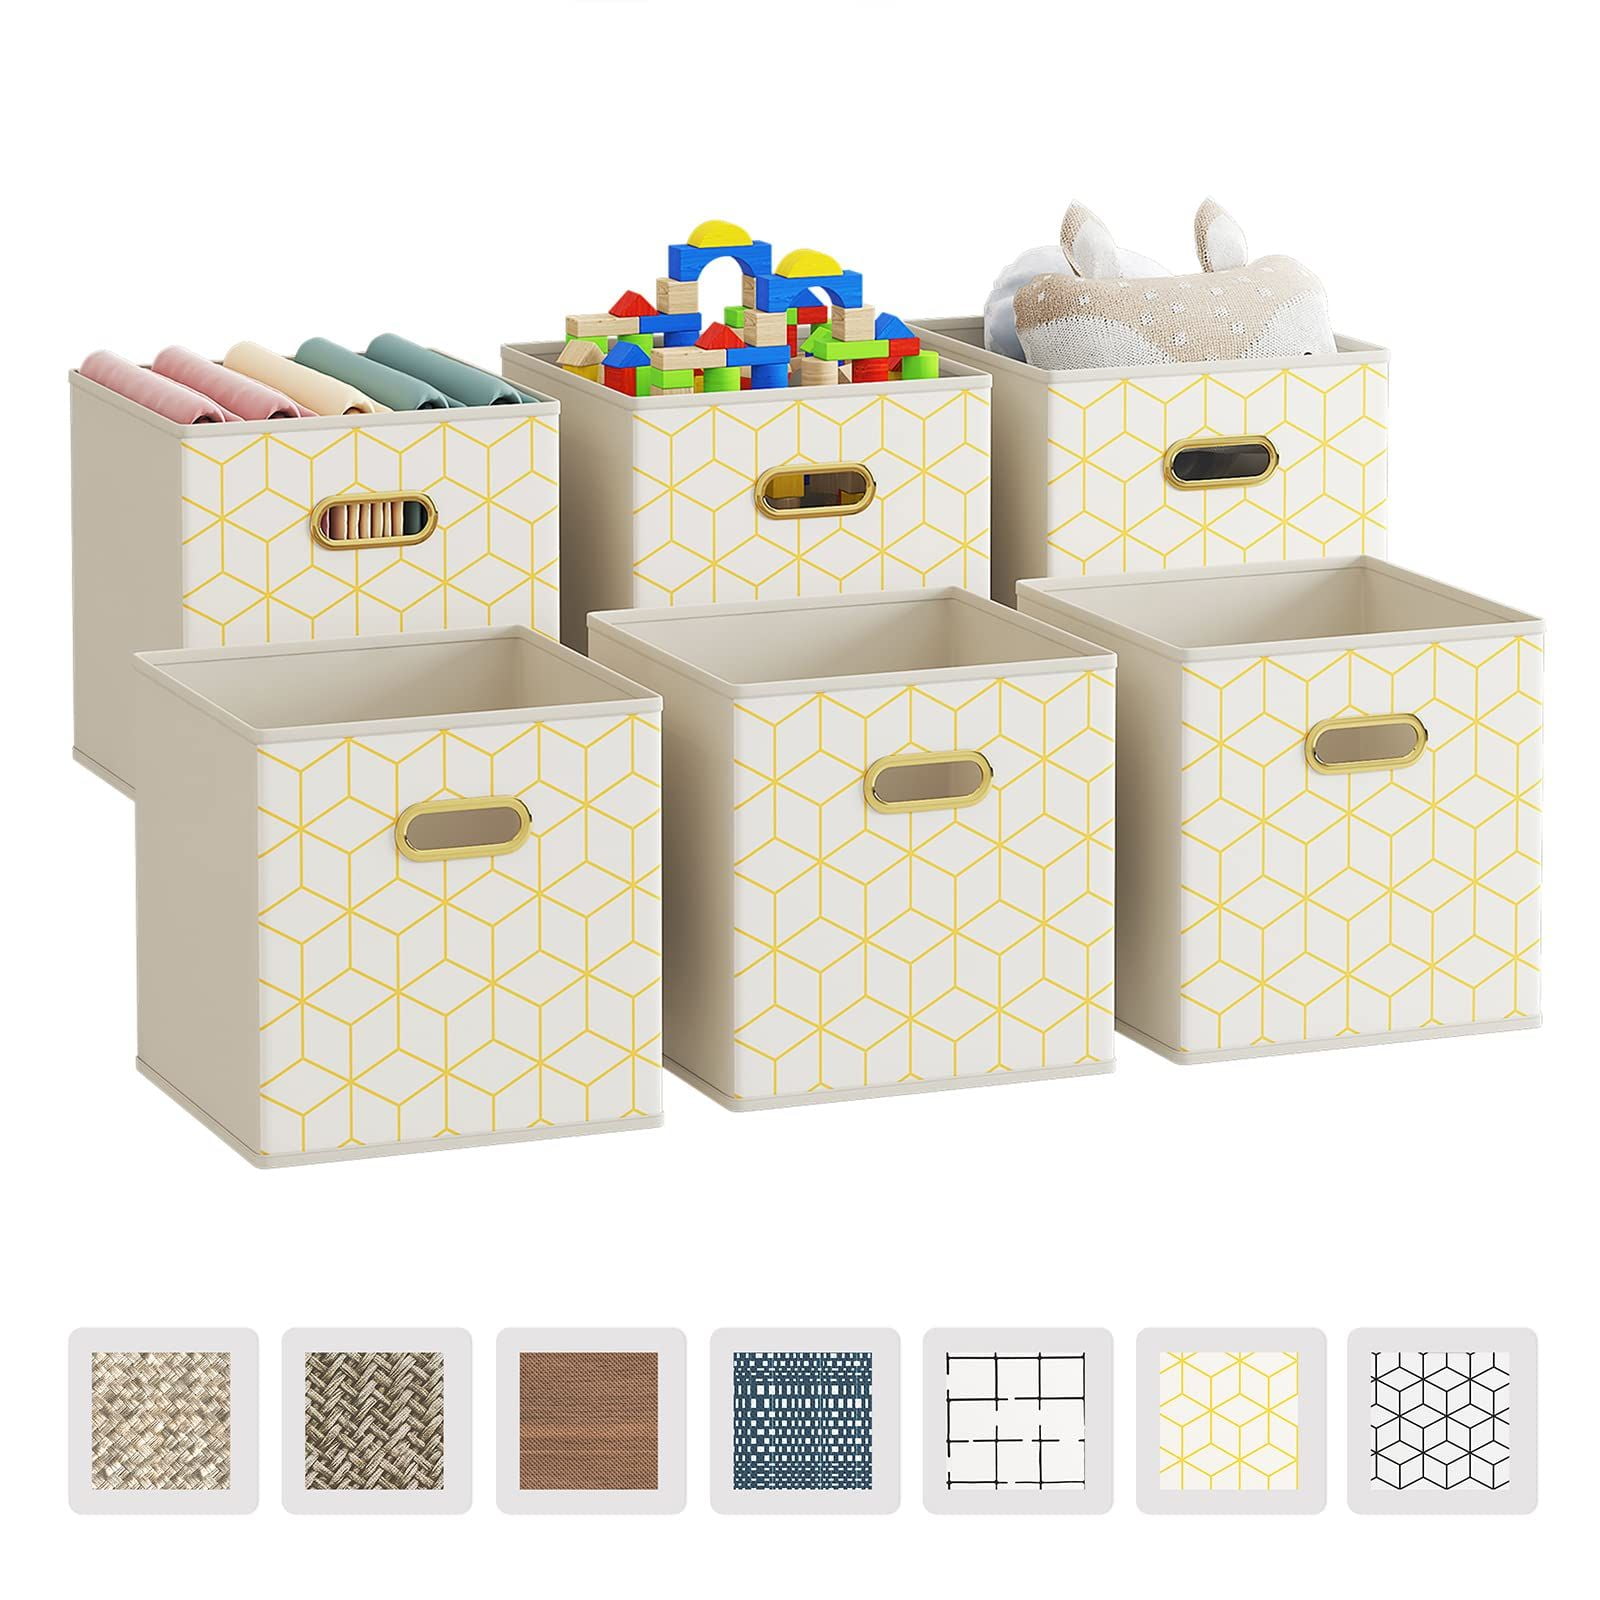 Wisdom Star 6 Pack Fabric Storage Cubes with Handle, Foldable 12 Inch Cube  Storage Bins, Storage Baskets for Shelves, Storage Boxes for Organizing